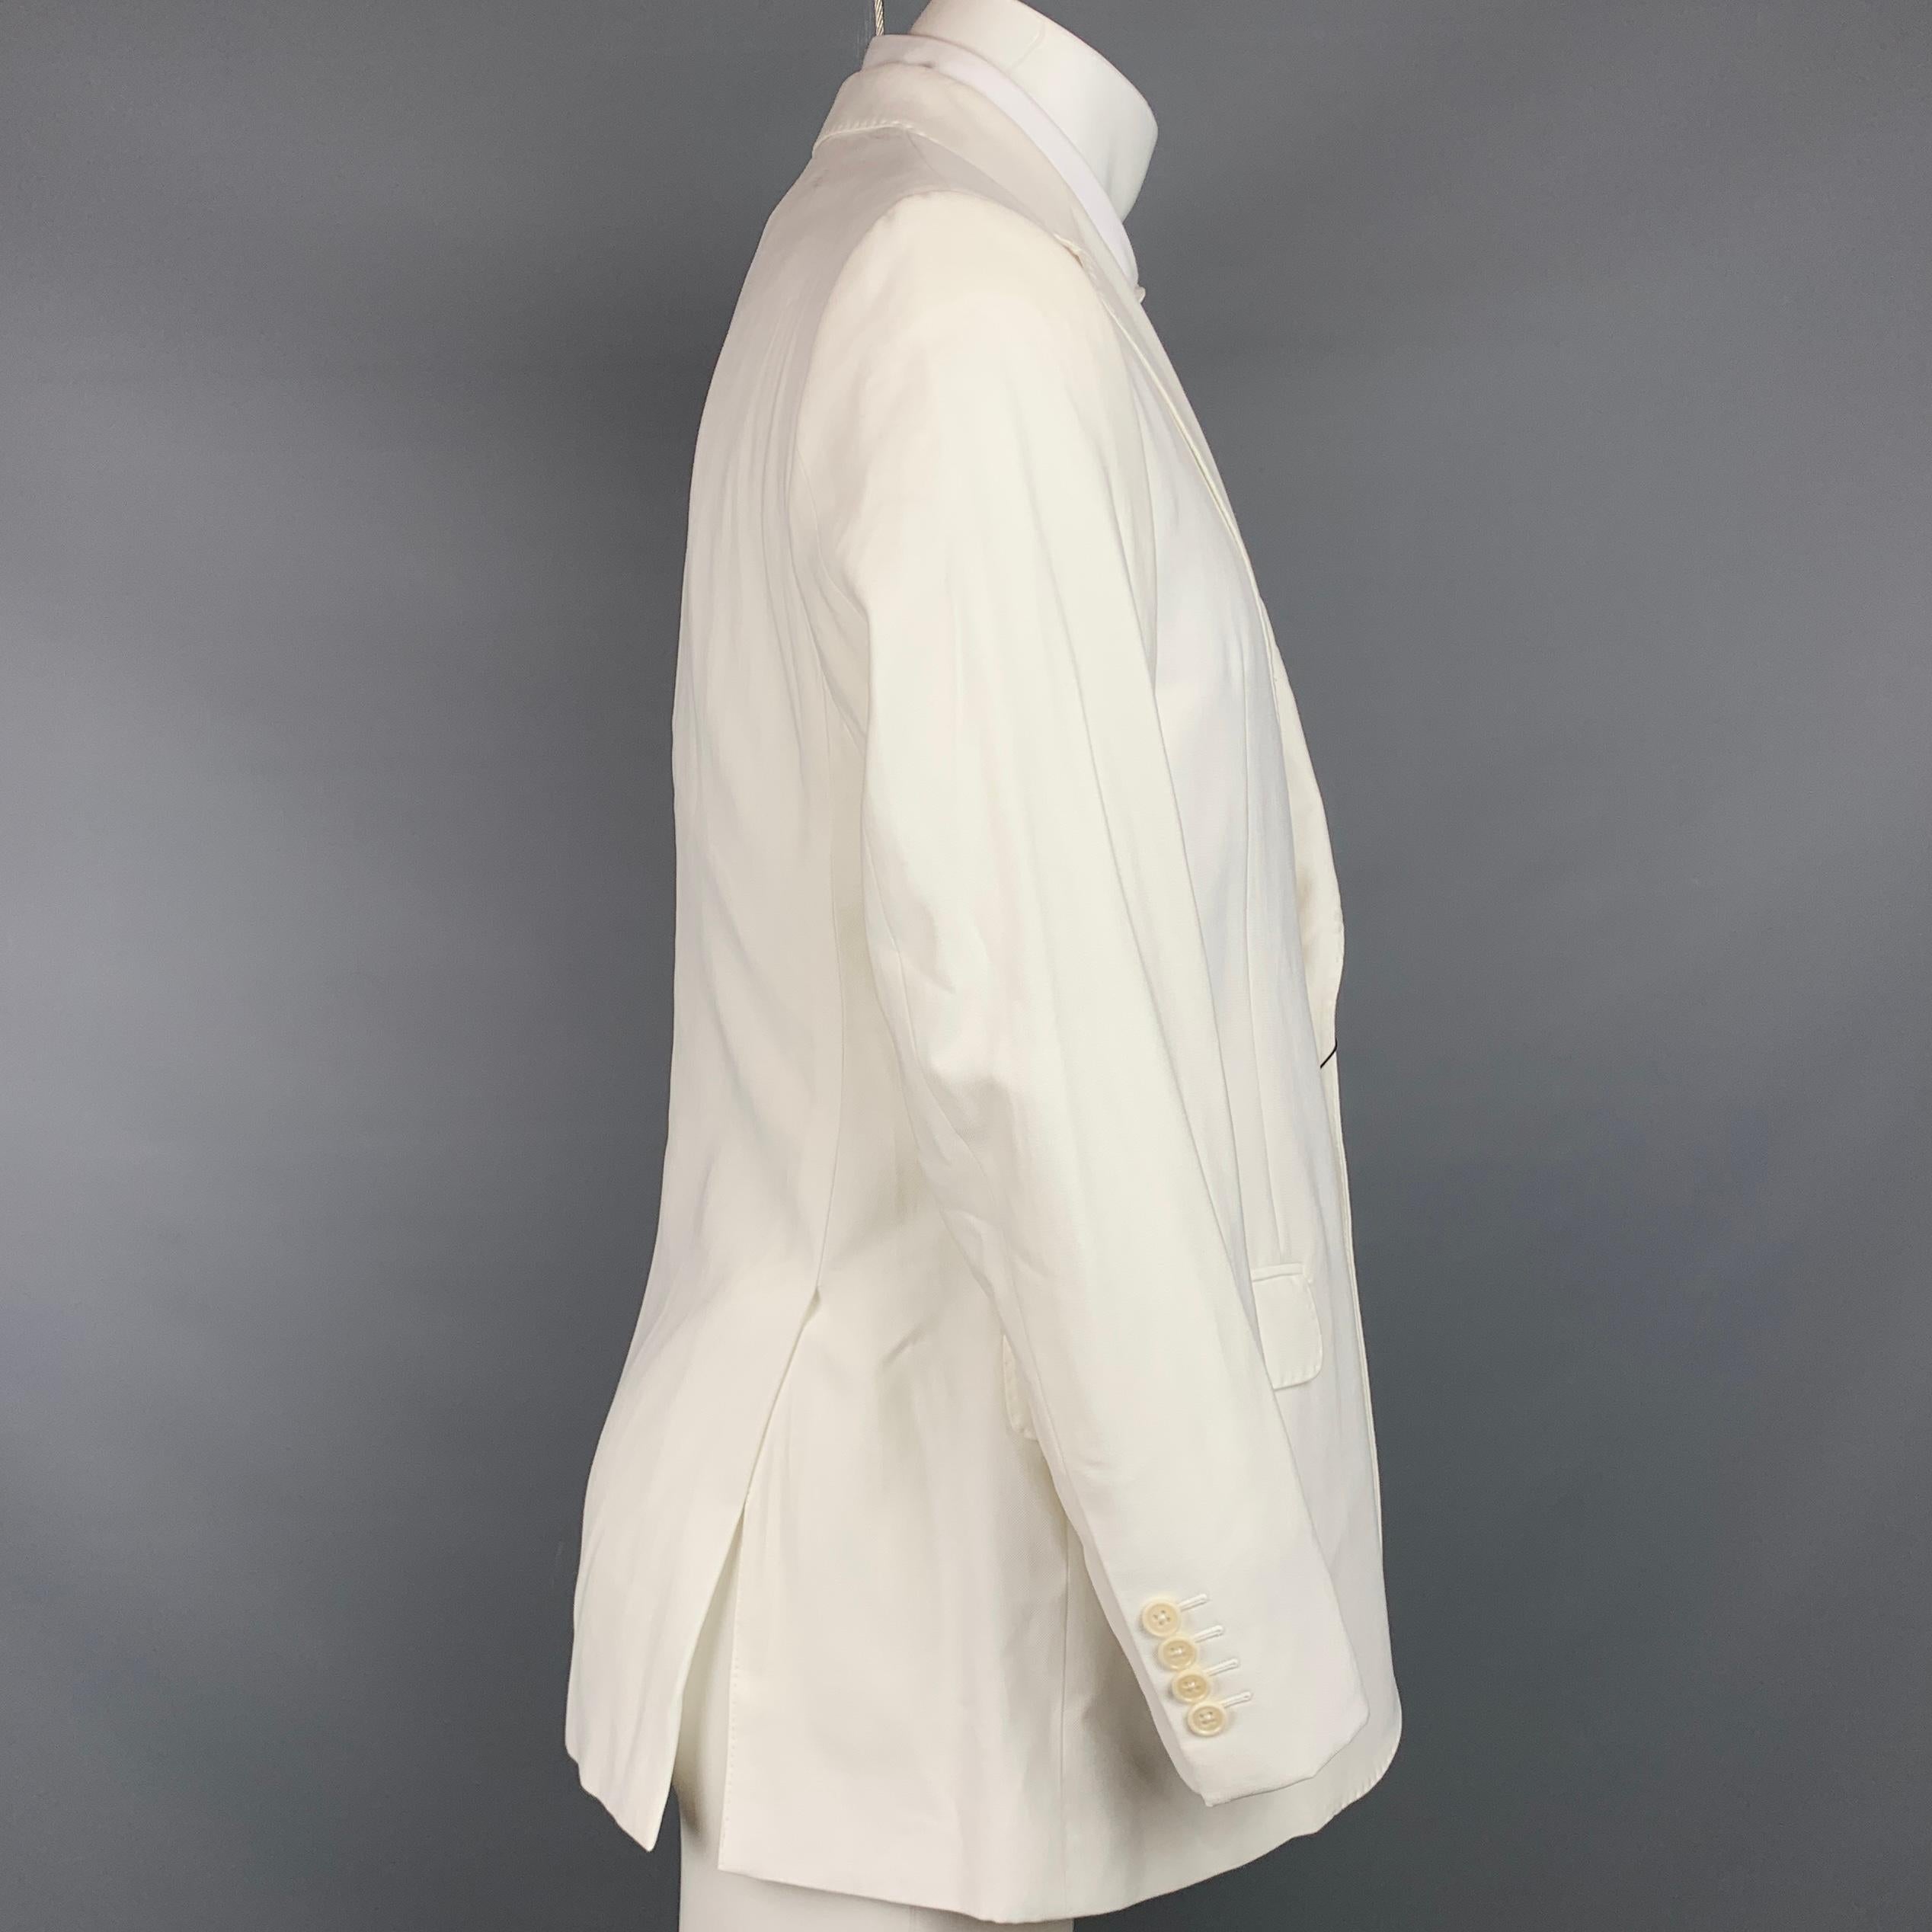 EMPORIO ARMANI sport coat comes in a white viscose blend with a full liner featuring a notch lapel, flap pockets, and a double button closure. Made in Bulgaria.

New With Tags.
Marked: 48
Original Retail Price: $995.00

Measurements:

Shoulder: 17.5